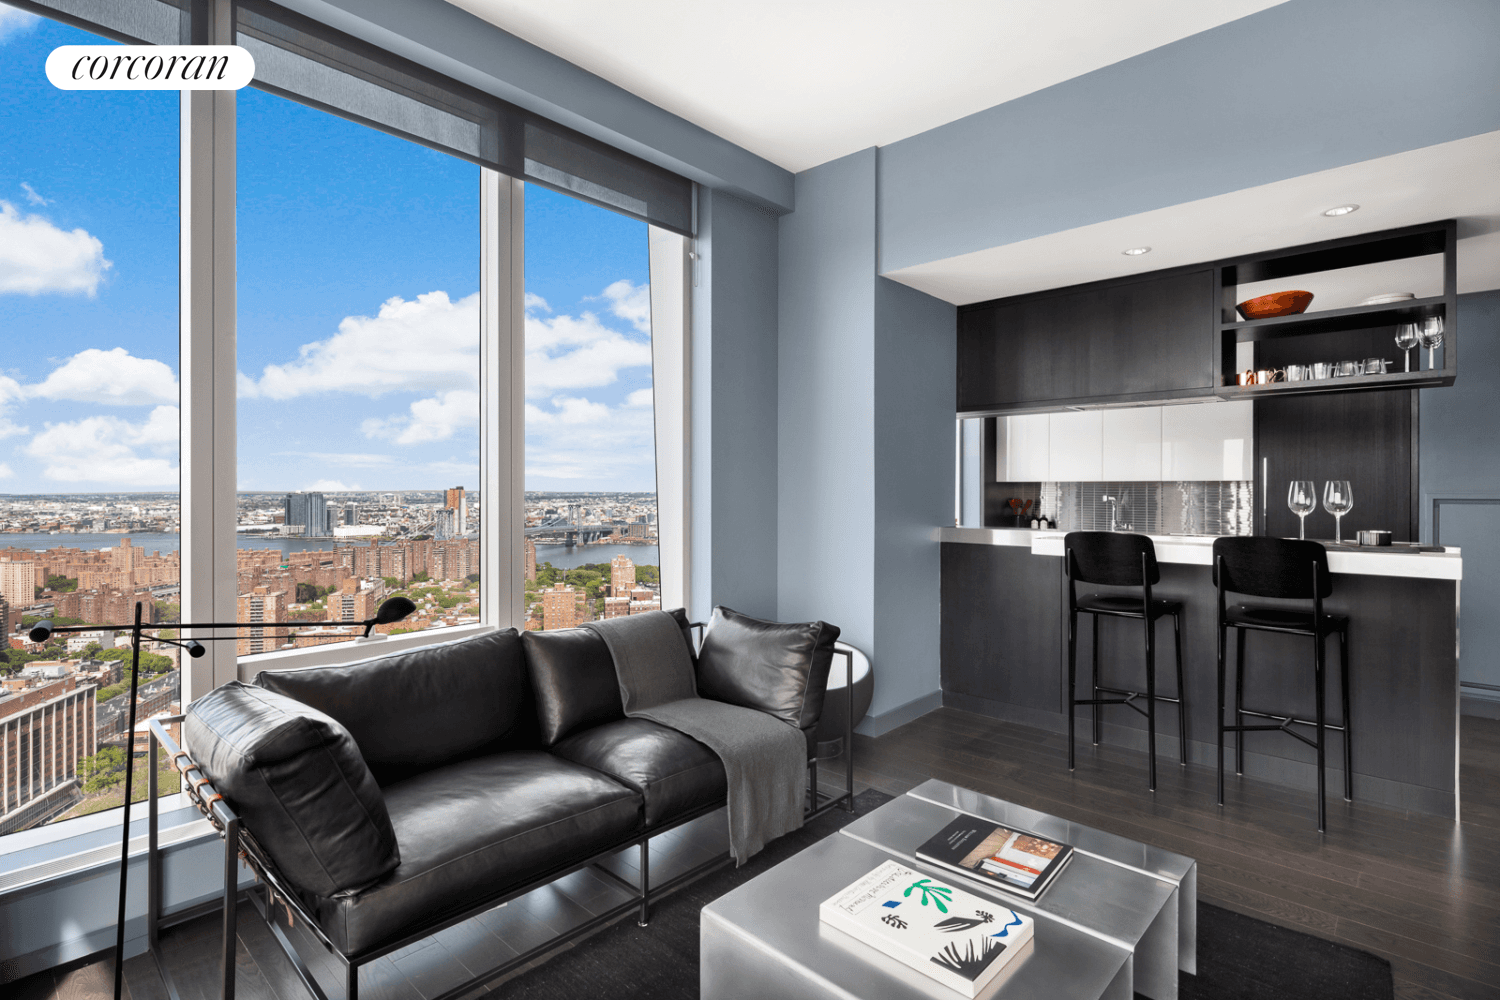 ONE MANHATTAN SQUARE OFFERS ONE OF THE LAST 20 YEAR TAX ABATEMENTS AVAILABLE IN NEW YORK CITYResidence 27L is a 1, 123 square foot two bedroom, two bathroom with an ...